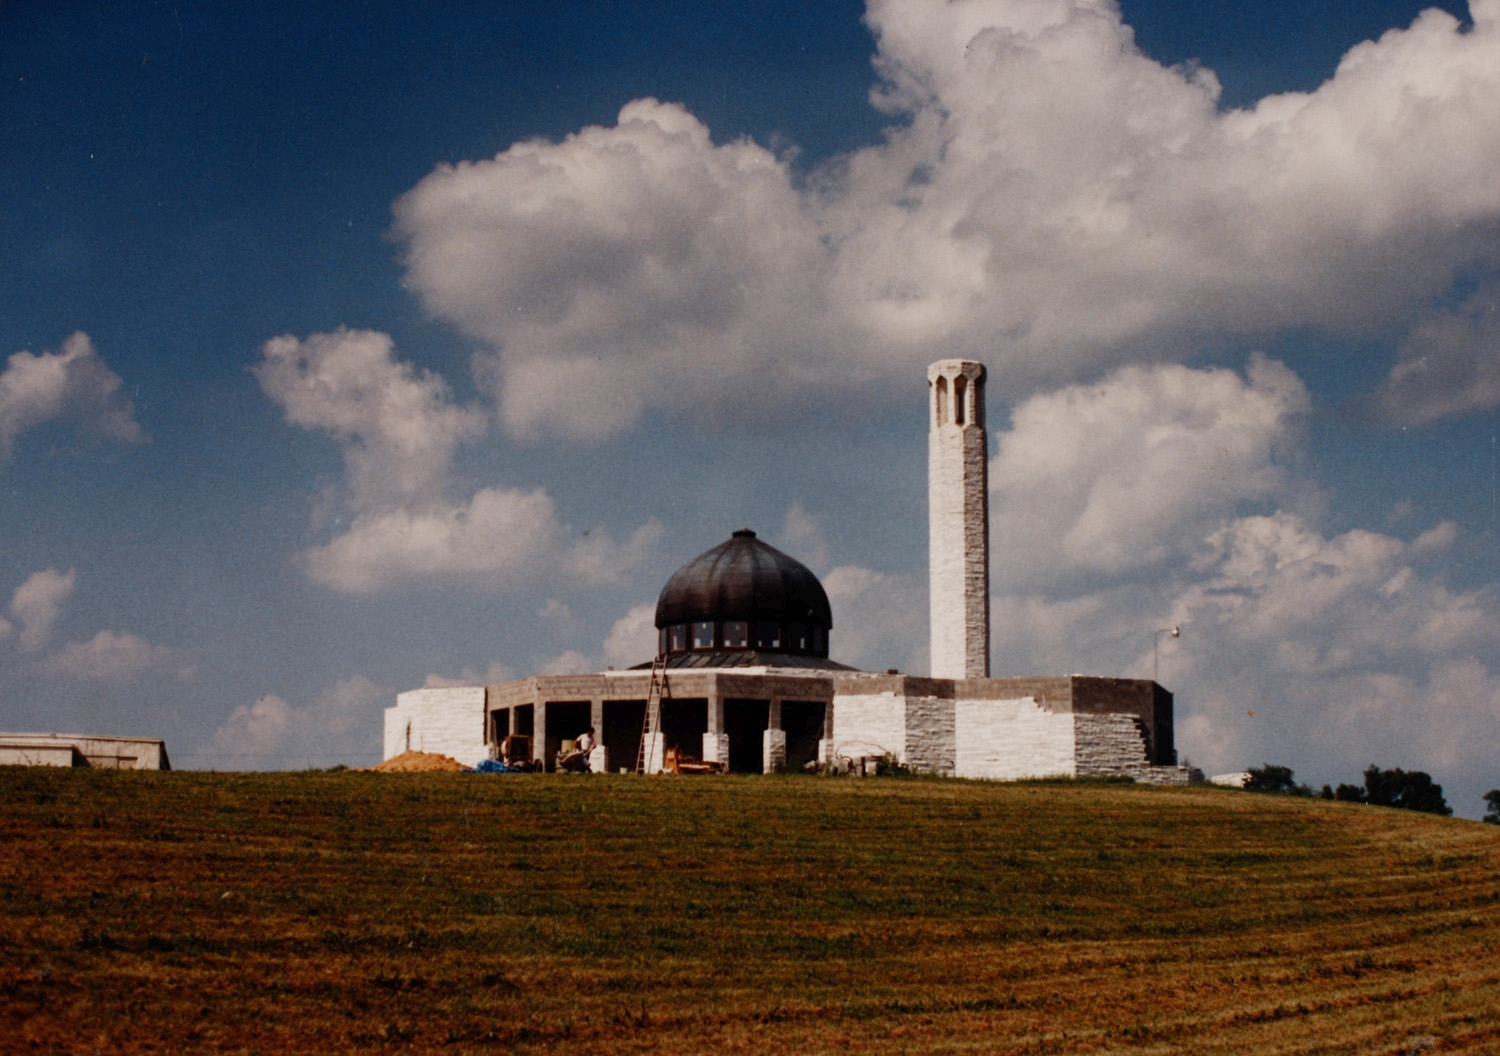 Mosque under construction, with white marble cladding being applied